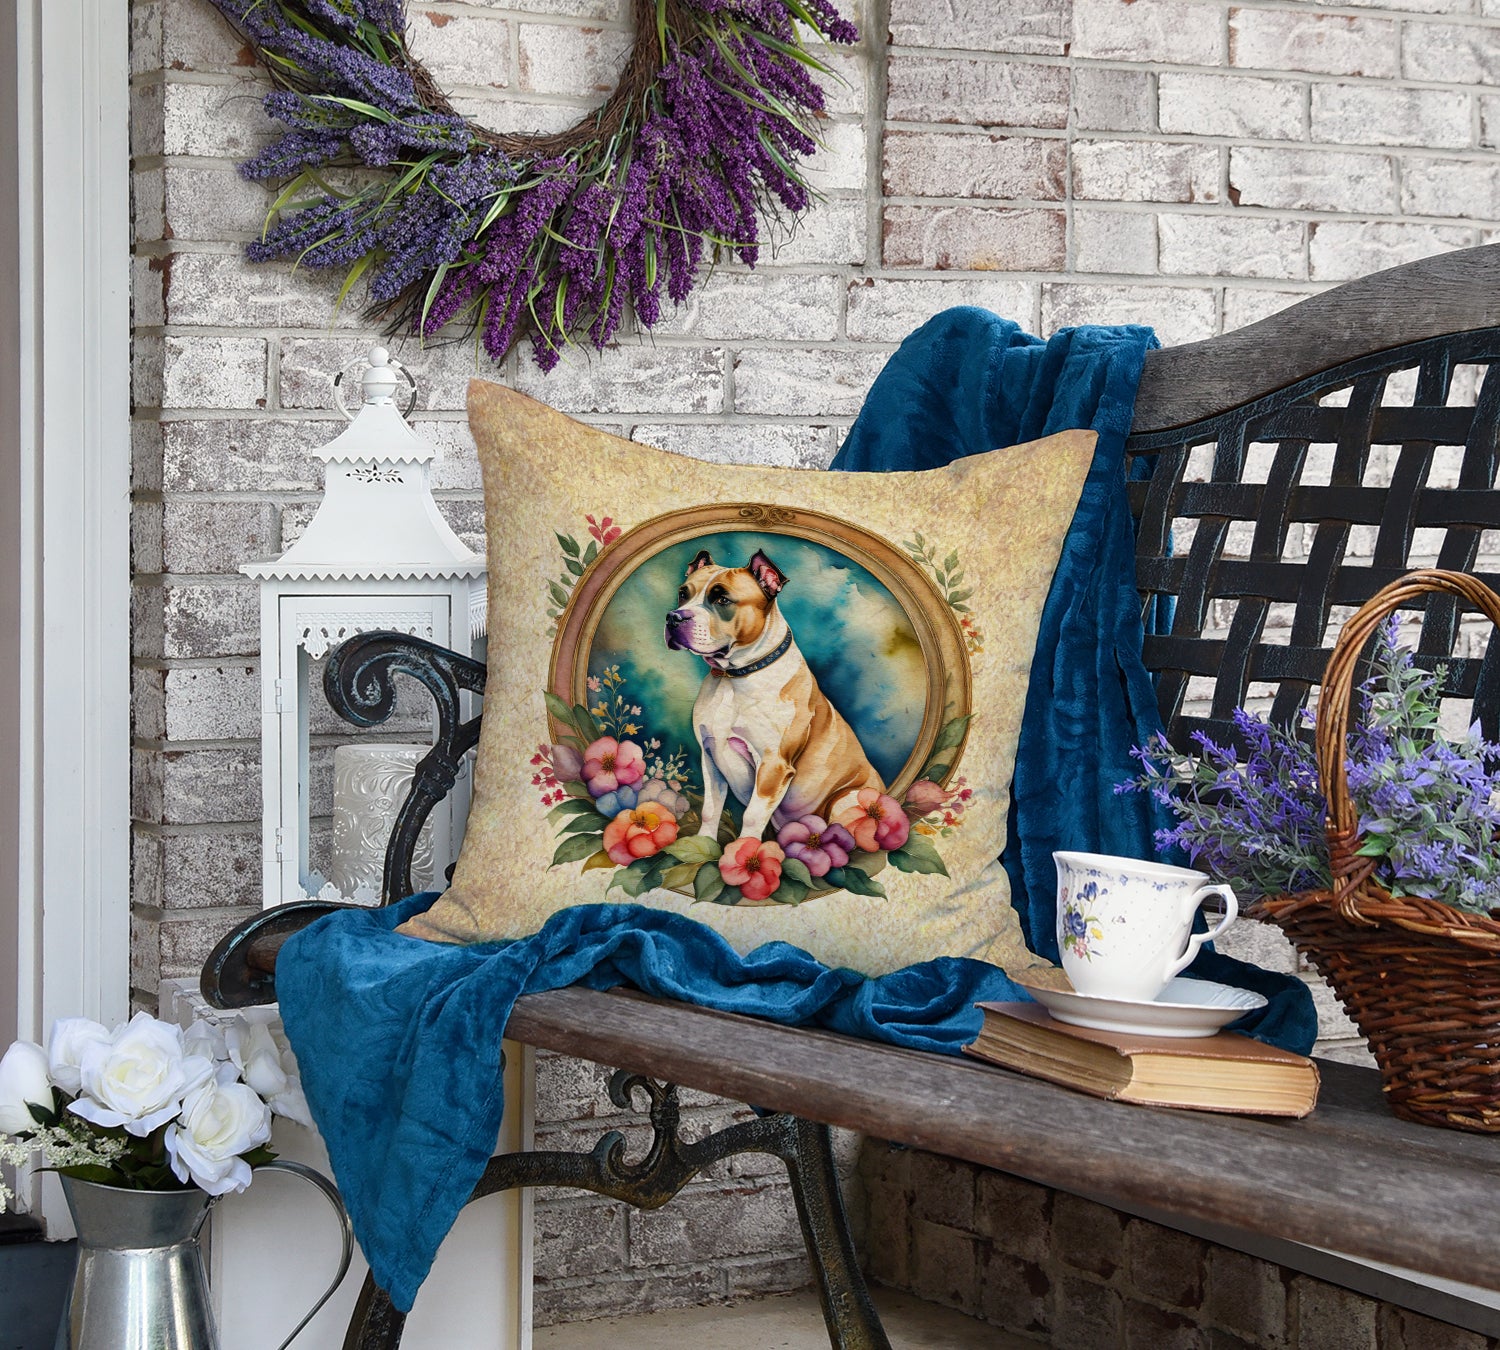 American Staffordshire Terrier and Flowers Fabric Decorative Pillow